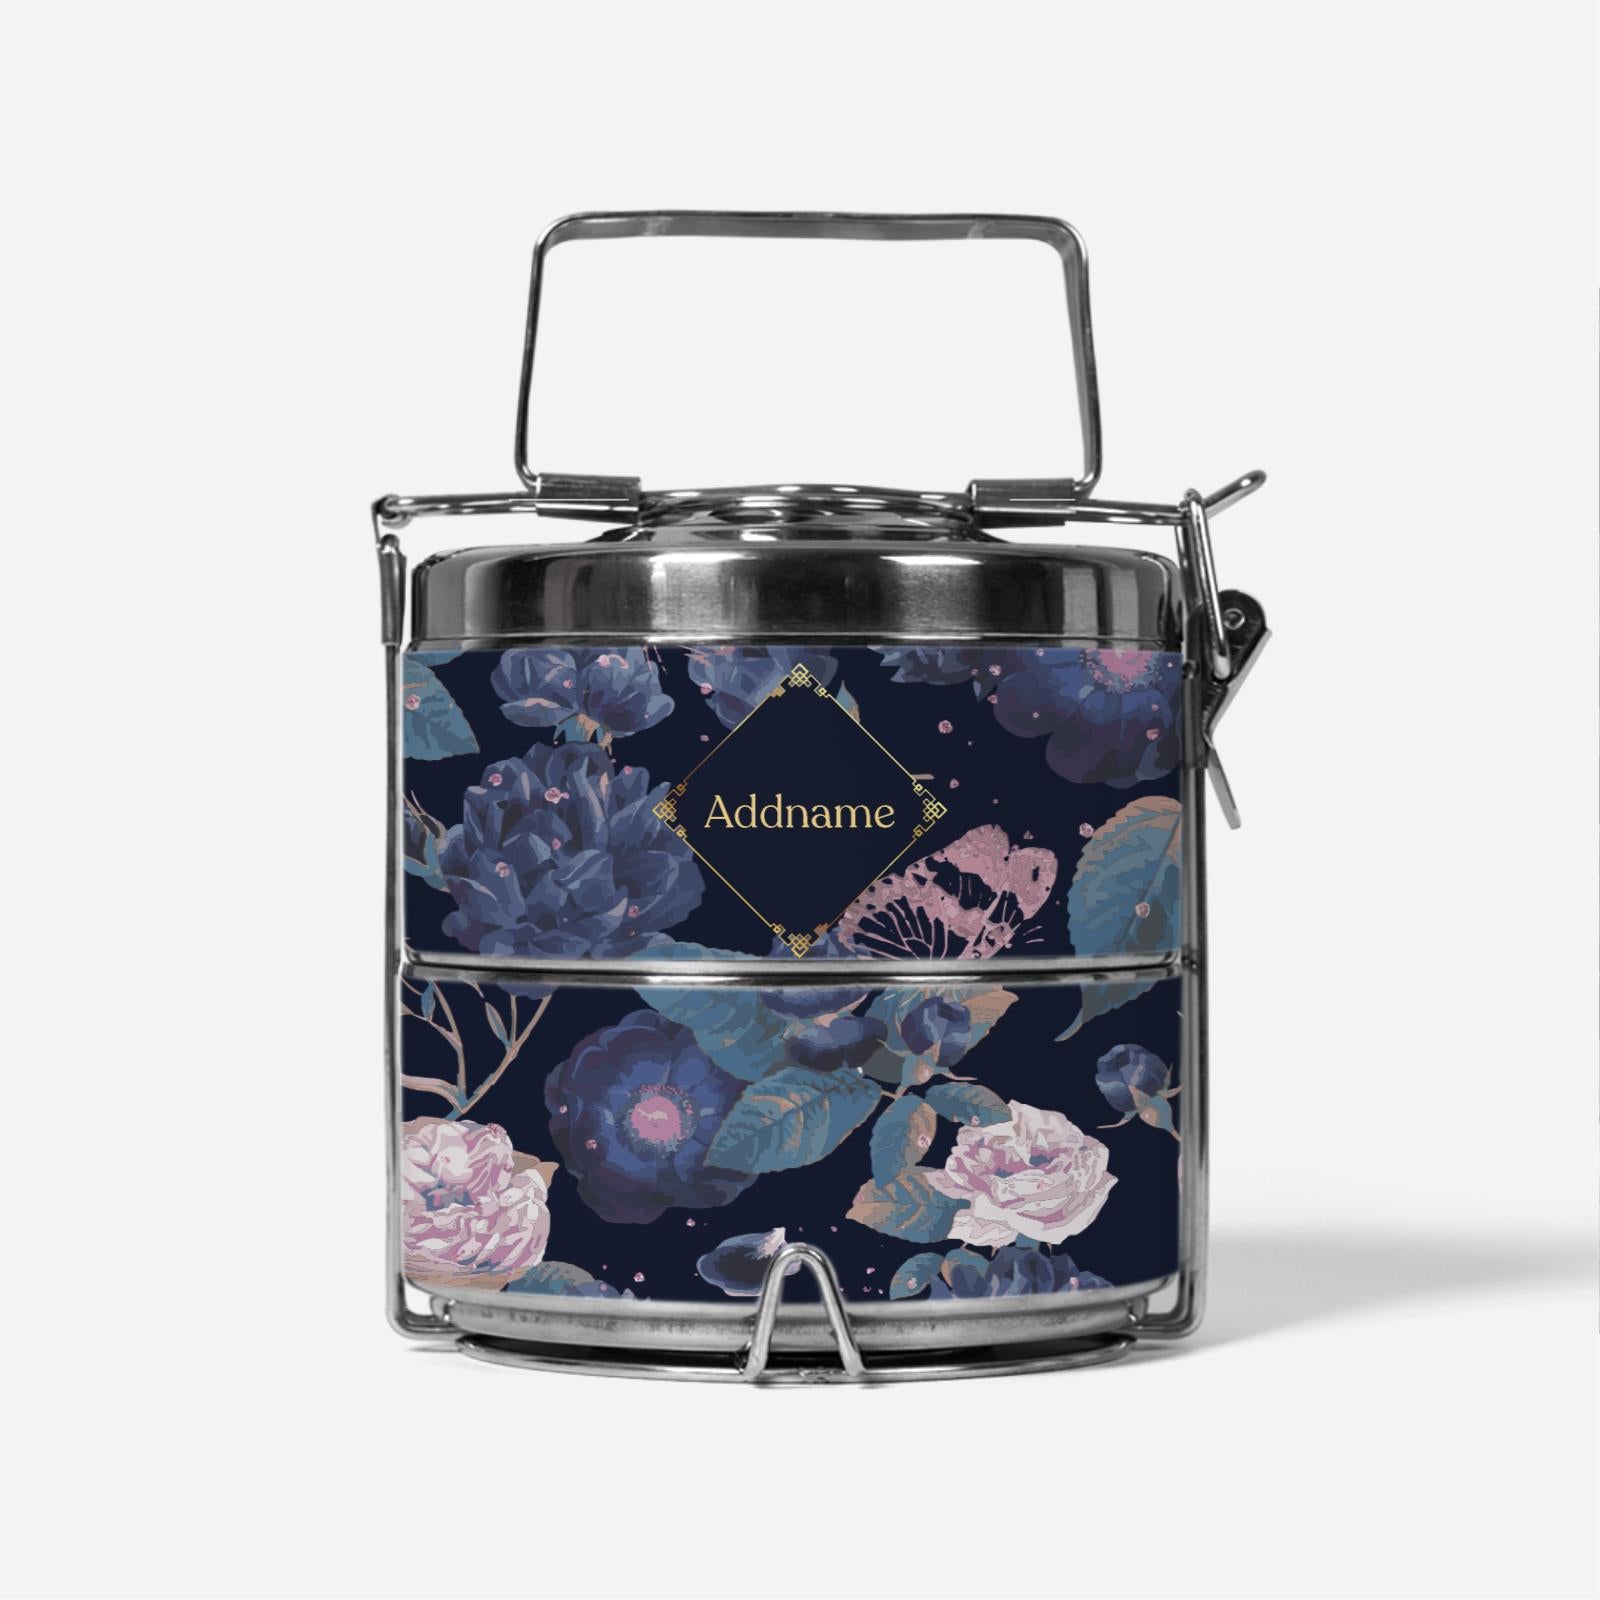 Royal Floral Series With English Personalization Two Tier Premium Tiffin Carrier - Serene Moonlight